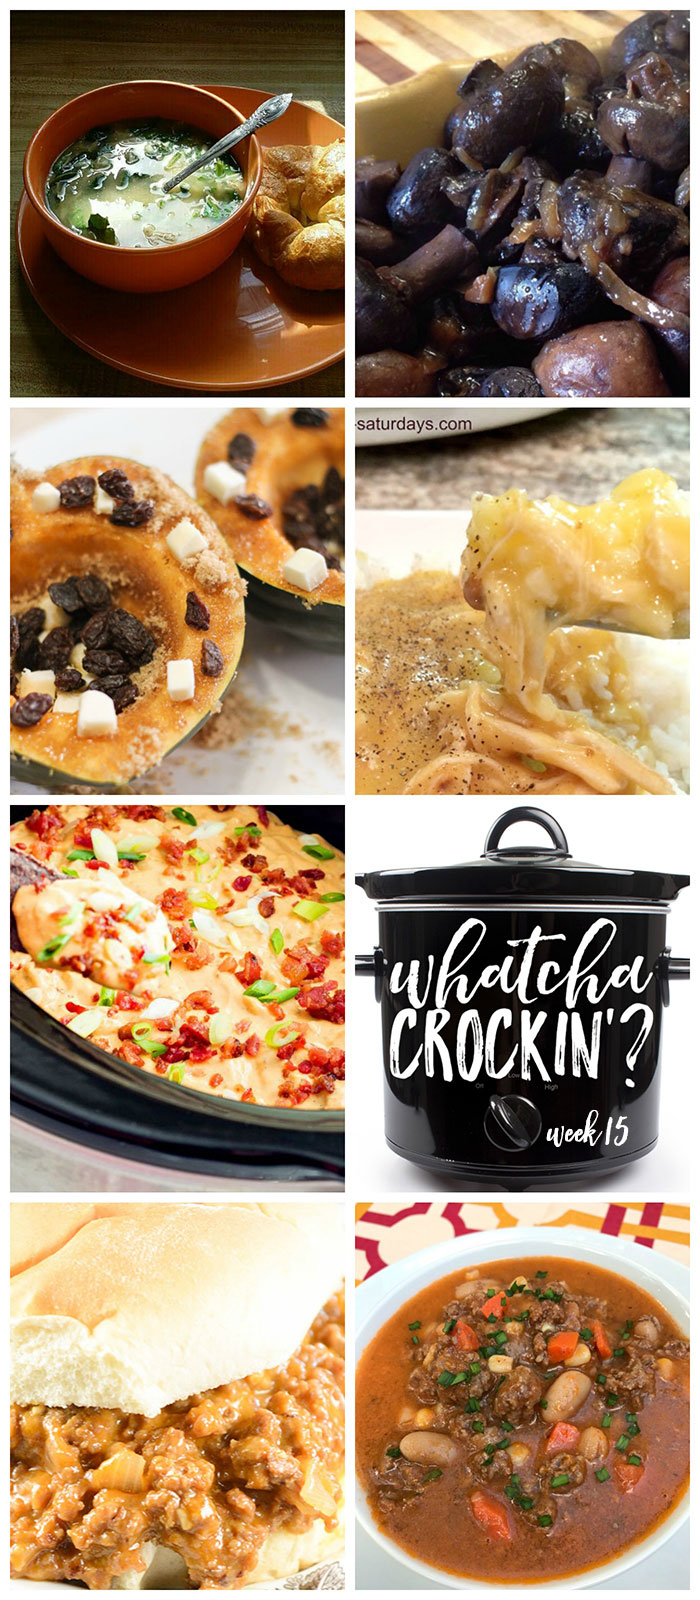 This week's Whatcha Crockin' crock pot recipes include Kickin' Cowboy Queso Dip, Beef Bean Slow Cooker Soup, Crock Pot Sloppy Joe Cheeseburgers, Crock Pot Mushrooms and Onions, Slow Cooker Buttery Acorn Squash, Slow Cooker Chicken Spinach and Orzo Soup, Electric Slow Cooker Cheesy Chicken and Rice and much more!